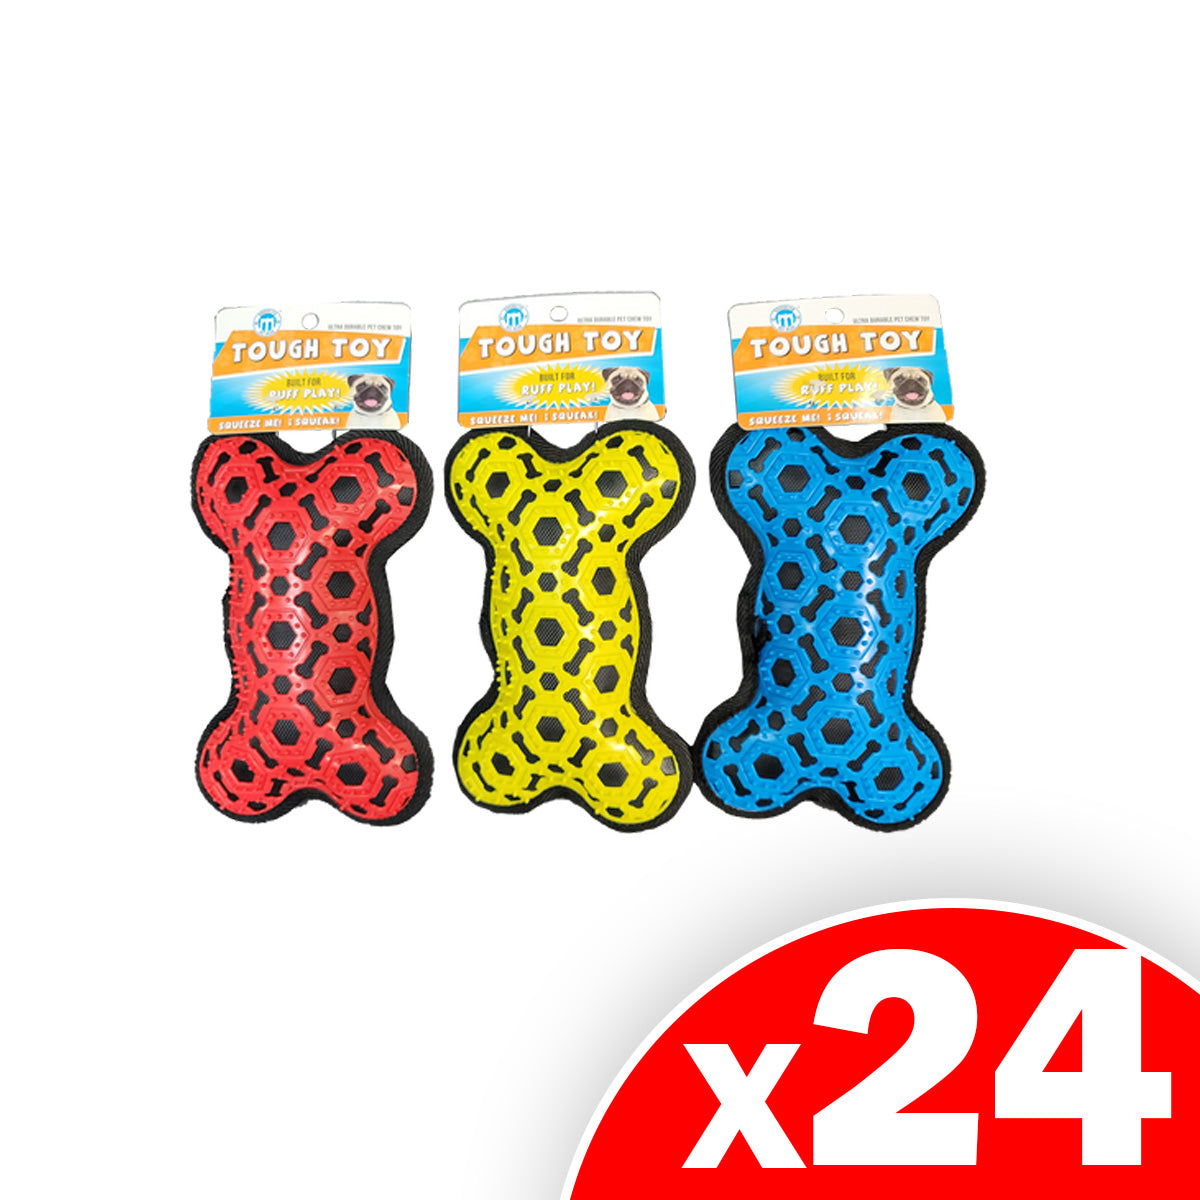 Tuff Toys Bone (Assorted Colors), 24 Pack of Singles